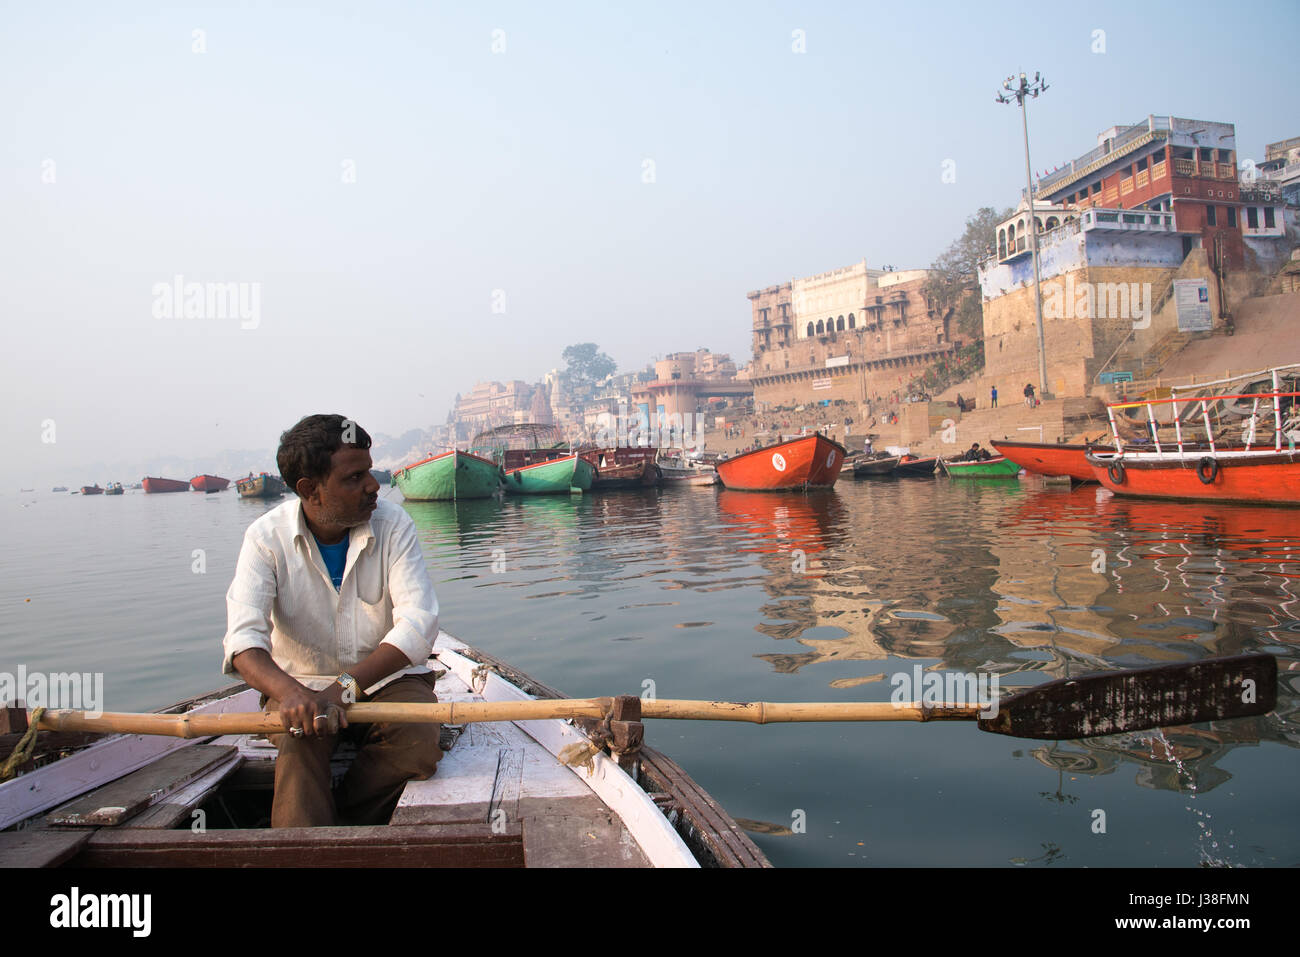 Man rowing a boat on the river Ganges in Varanasi, India Stock Photo